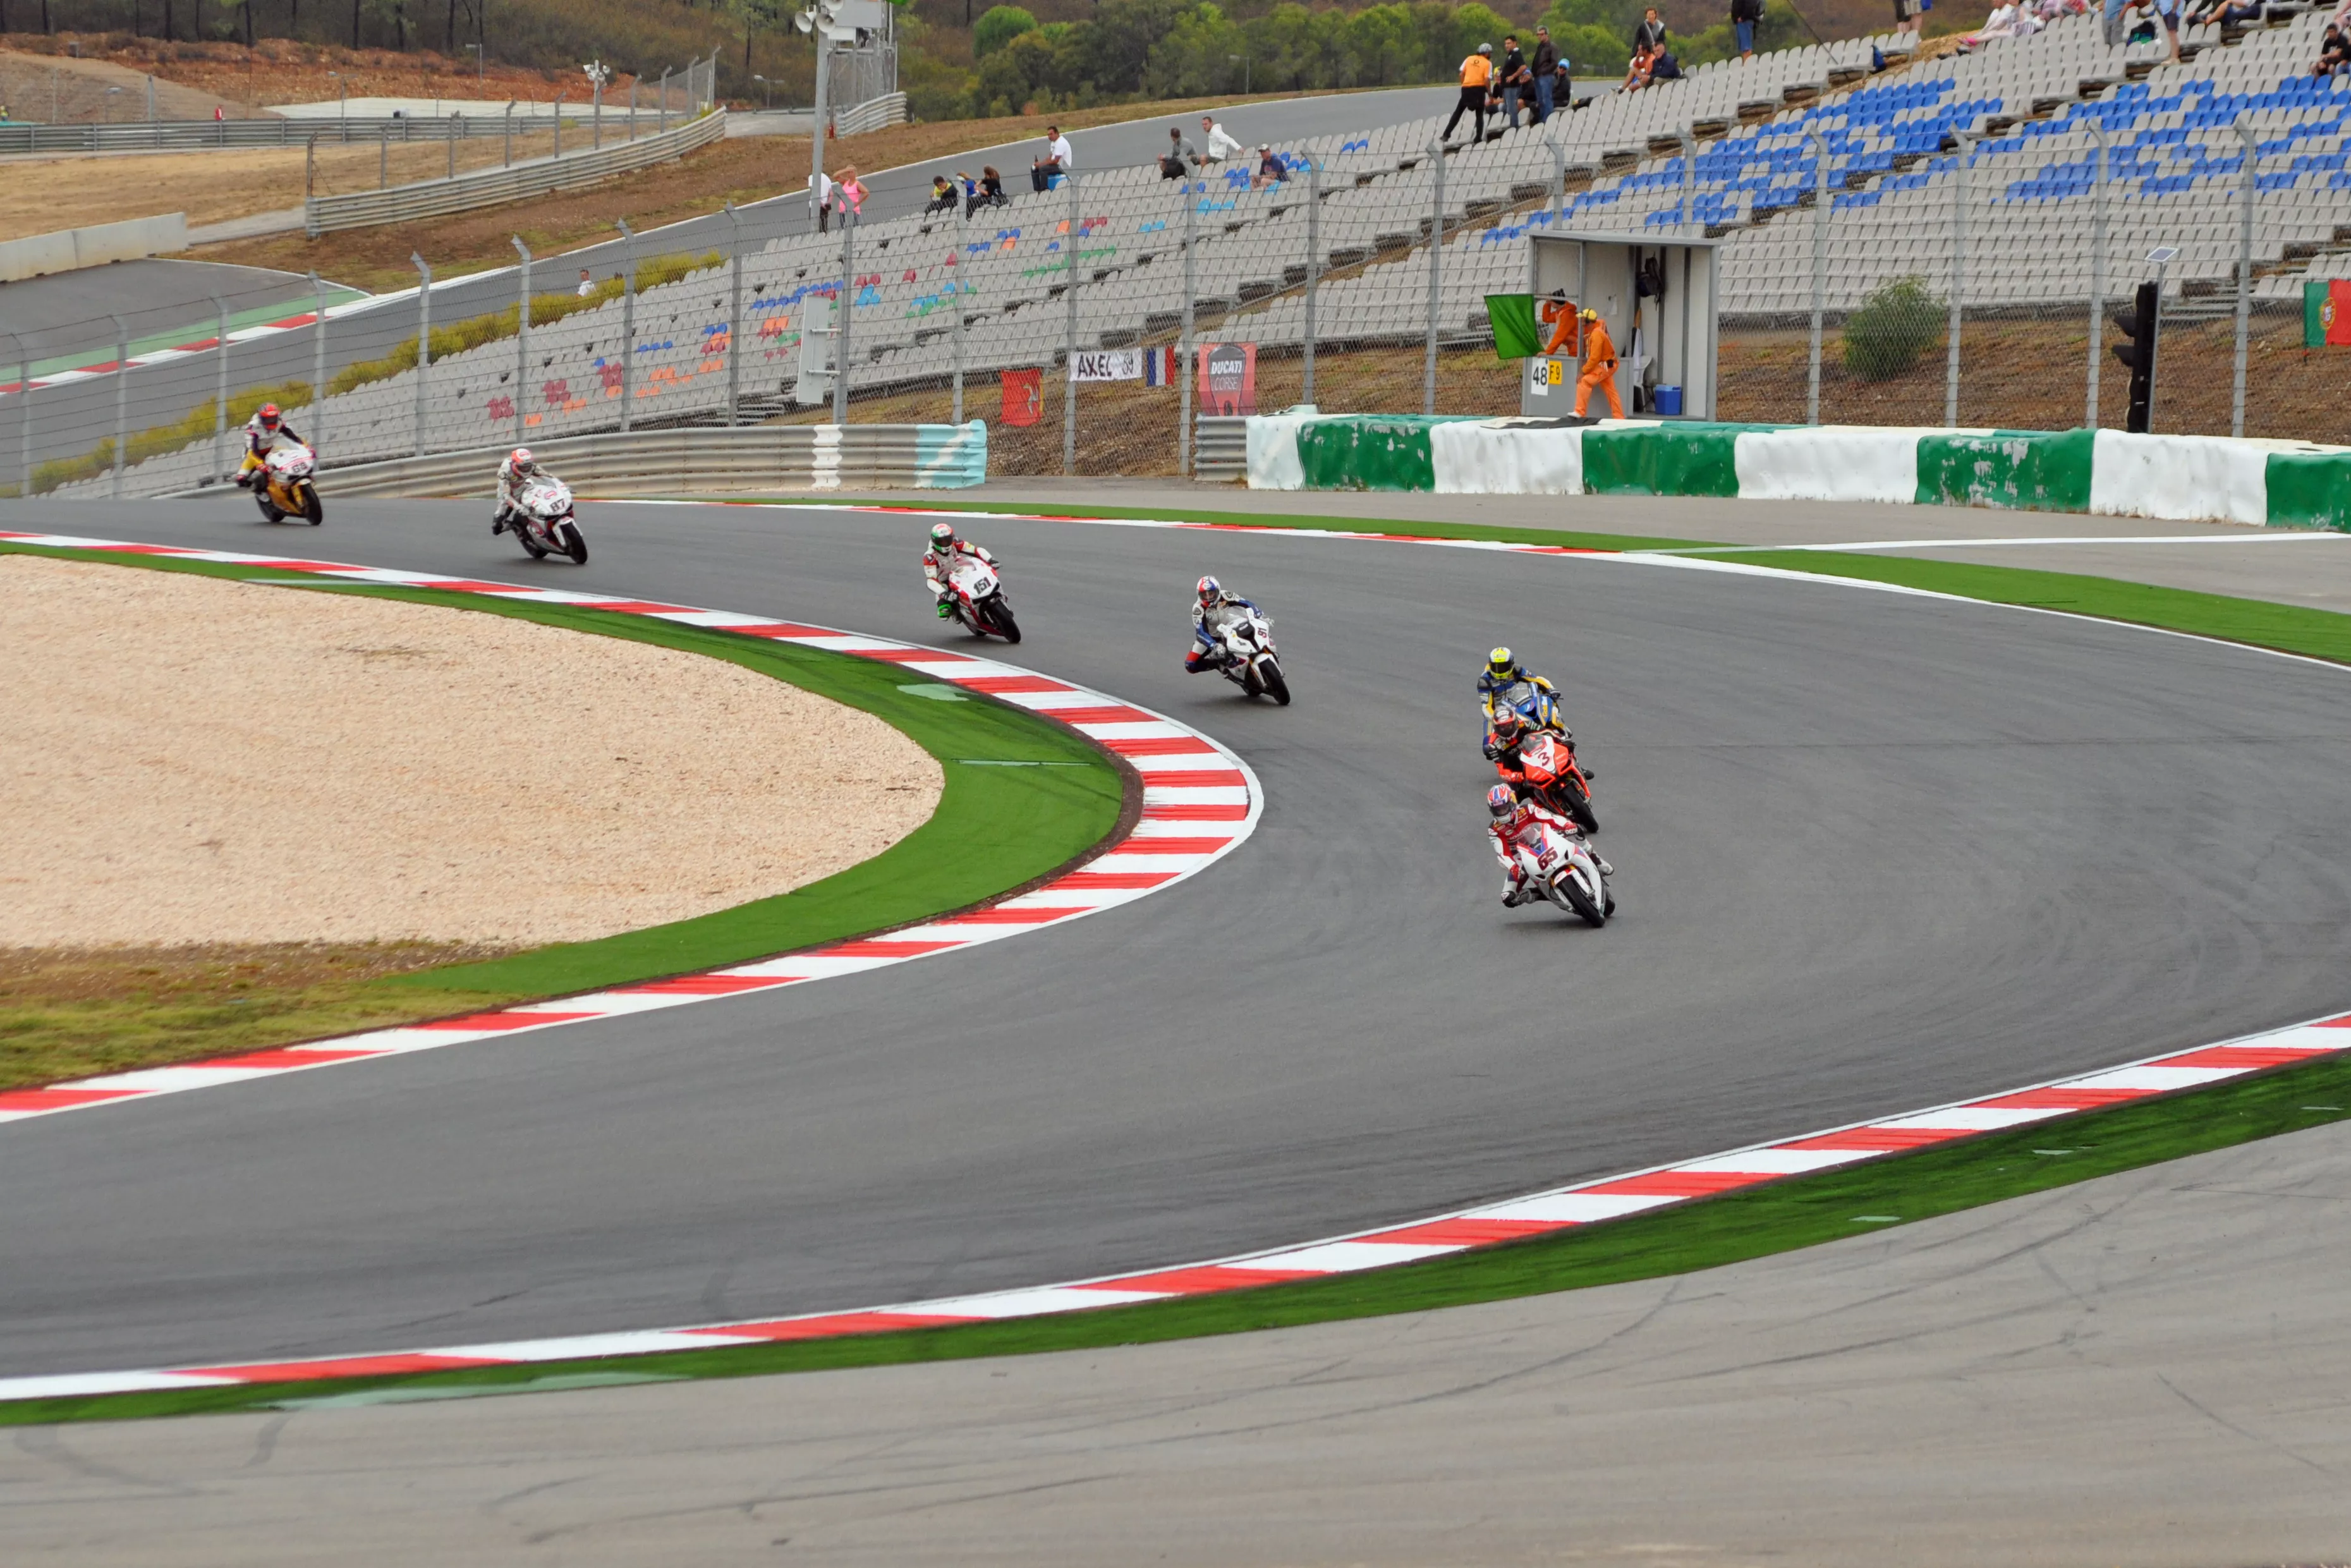 Autodromo dell'Umbria in Italy, Europe | Racing,Motorcycles - Rated 3.9